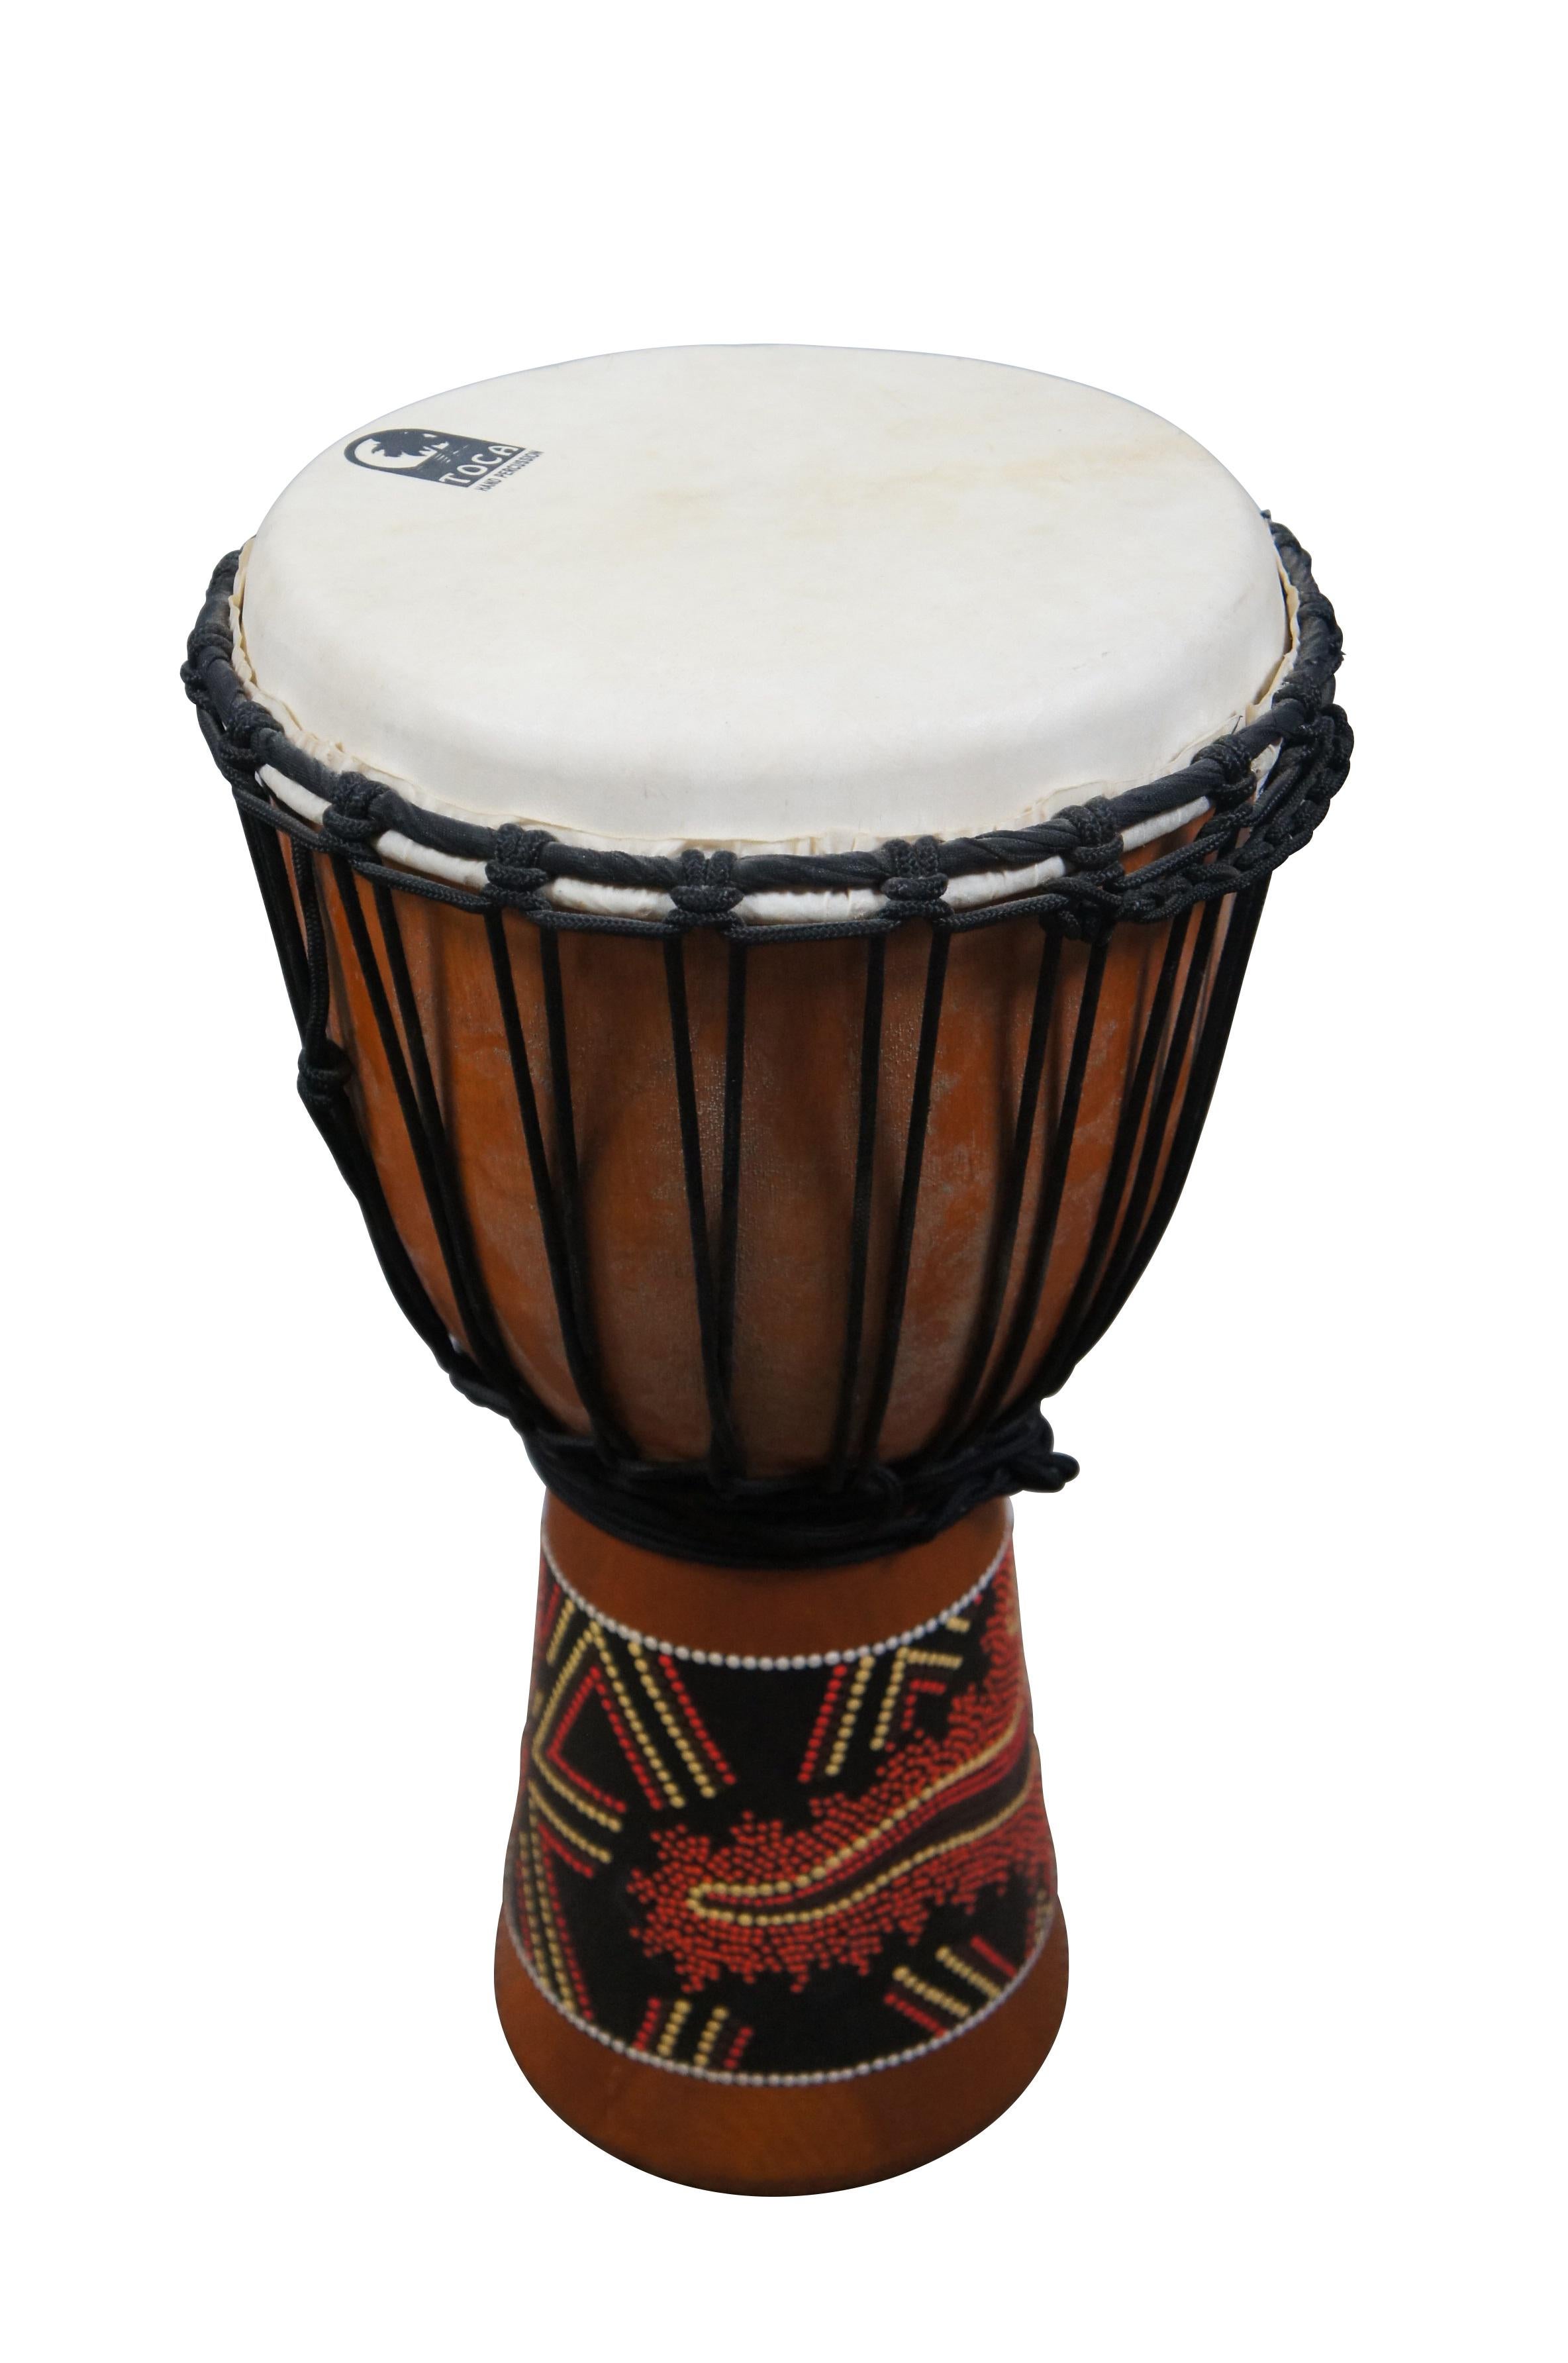 Late 20th century Toca Hand Percussion djembe drum. 12